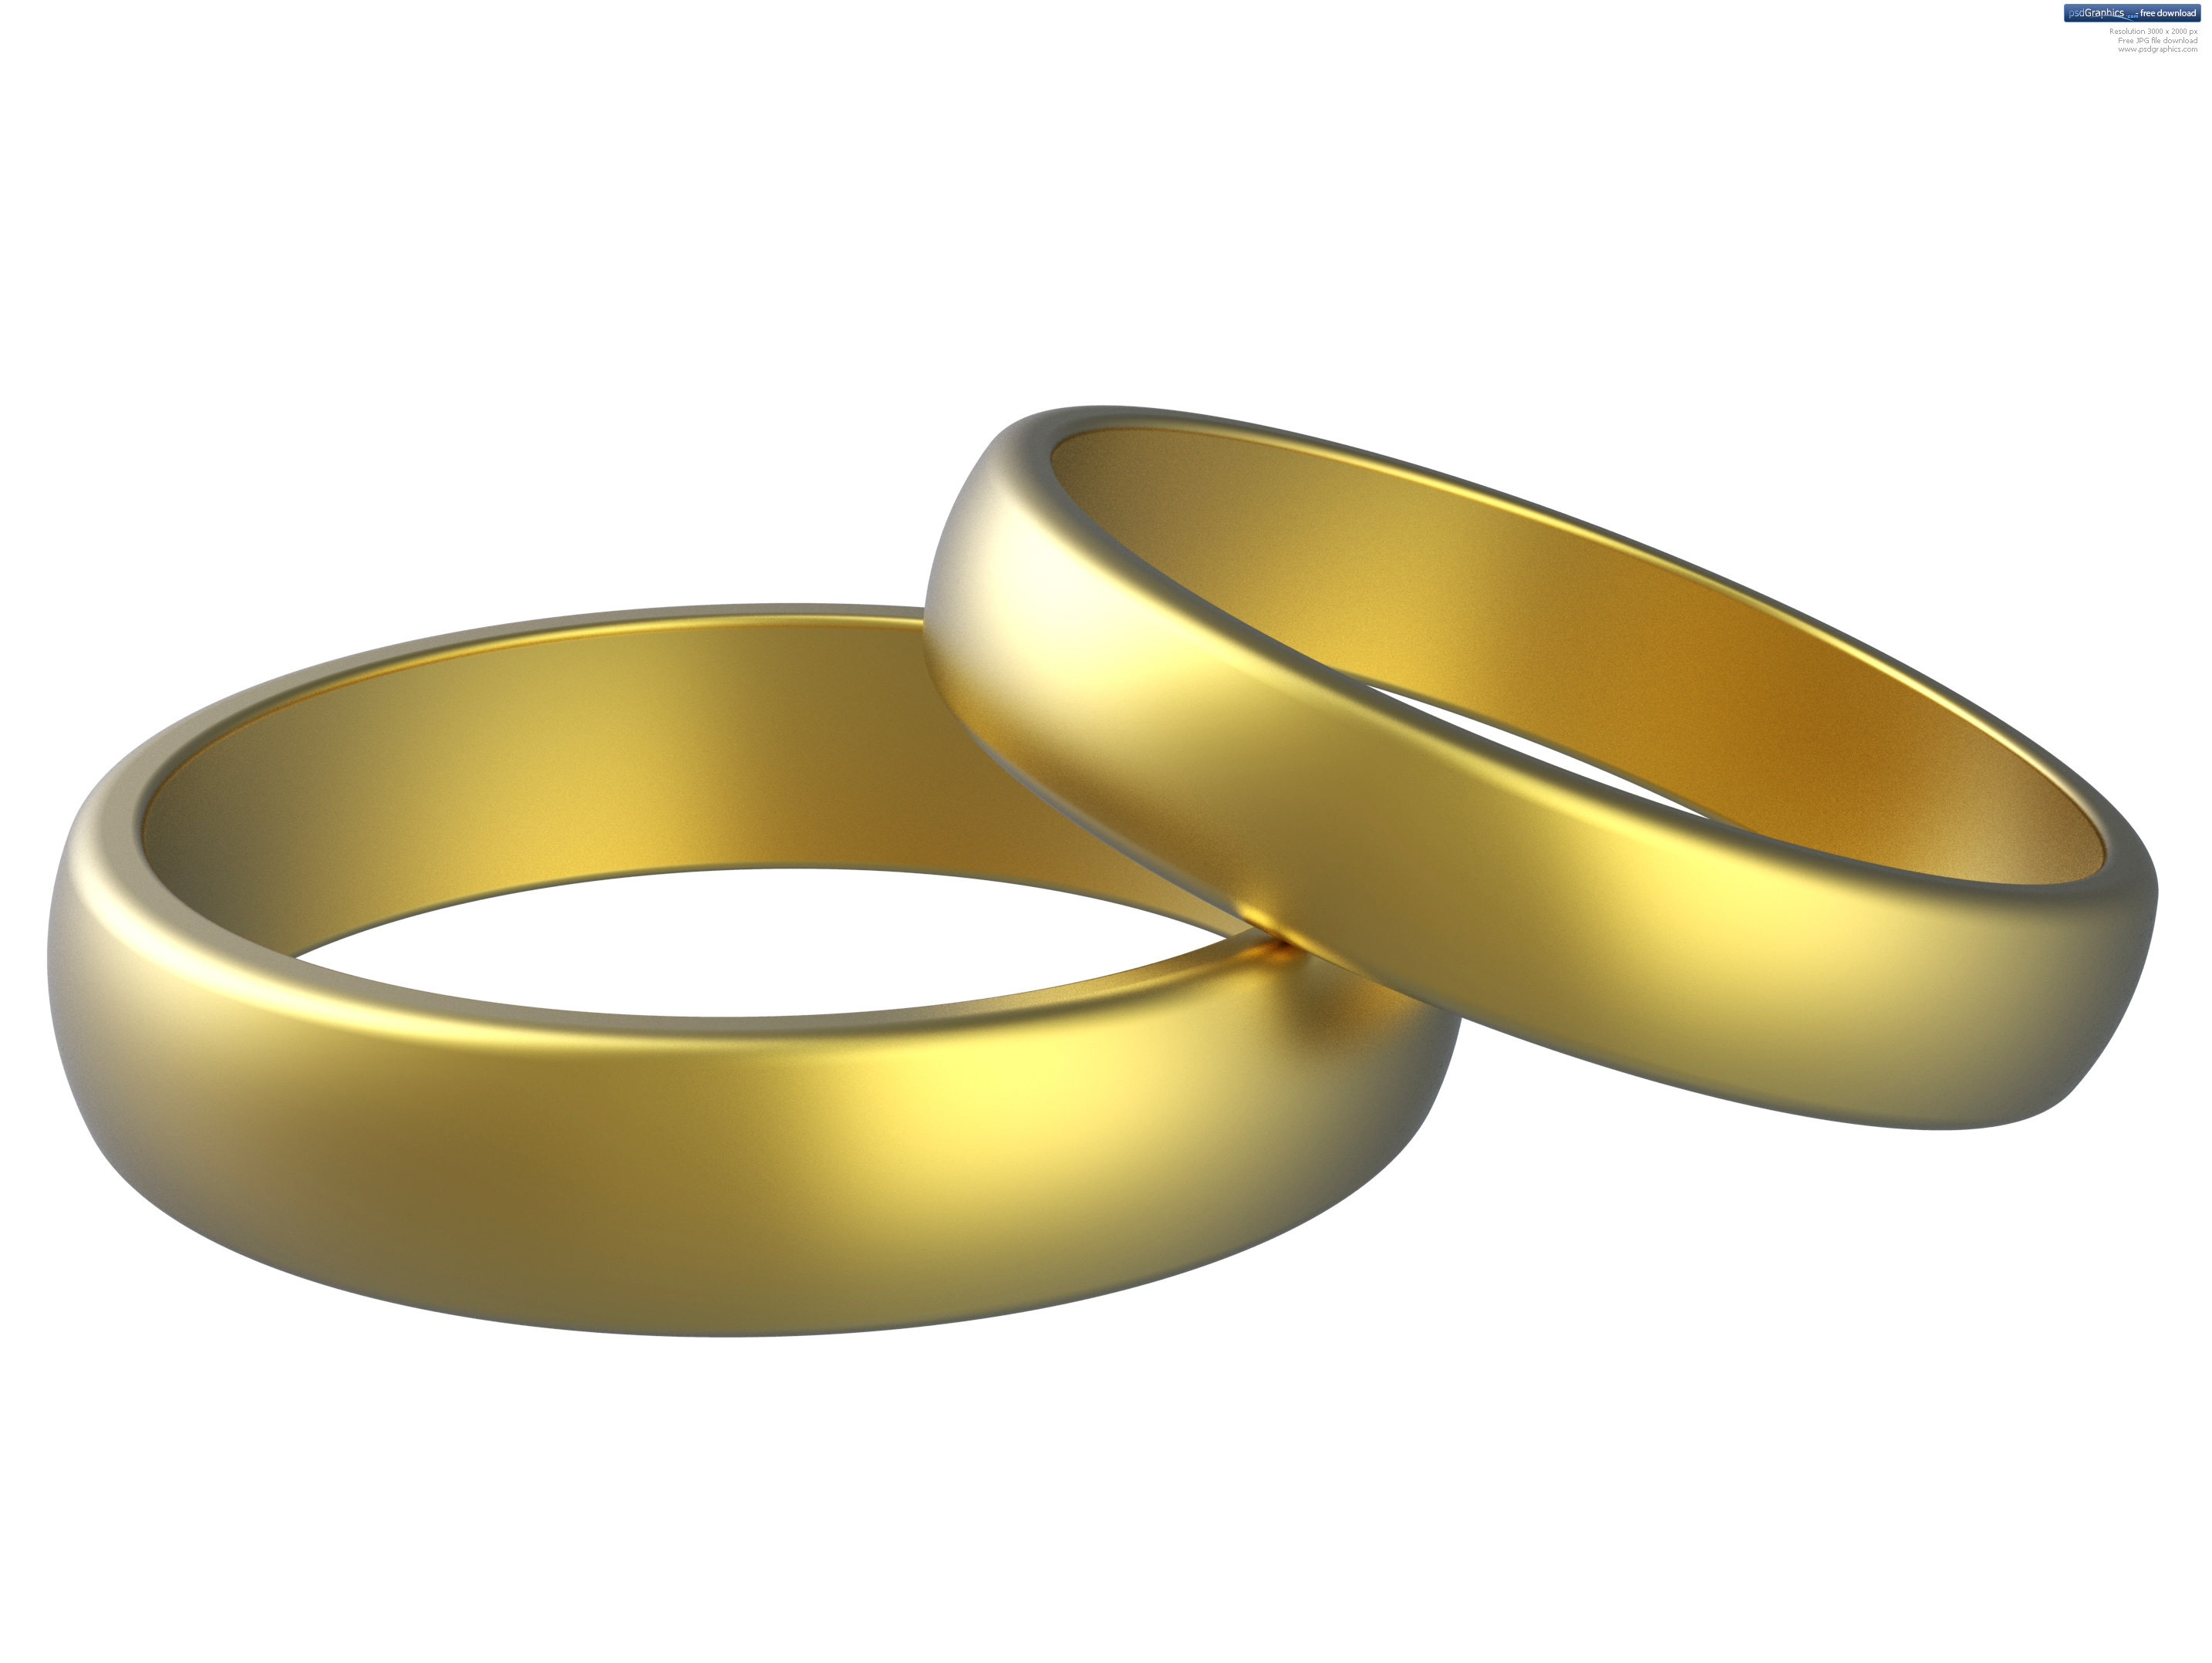 Free wedding ring cliparts the cliparts